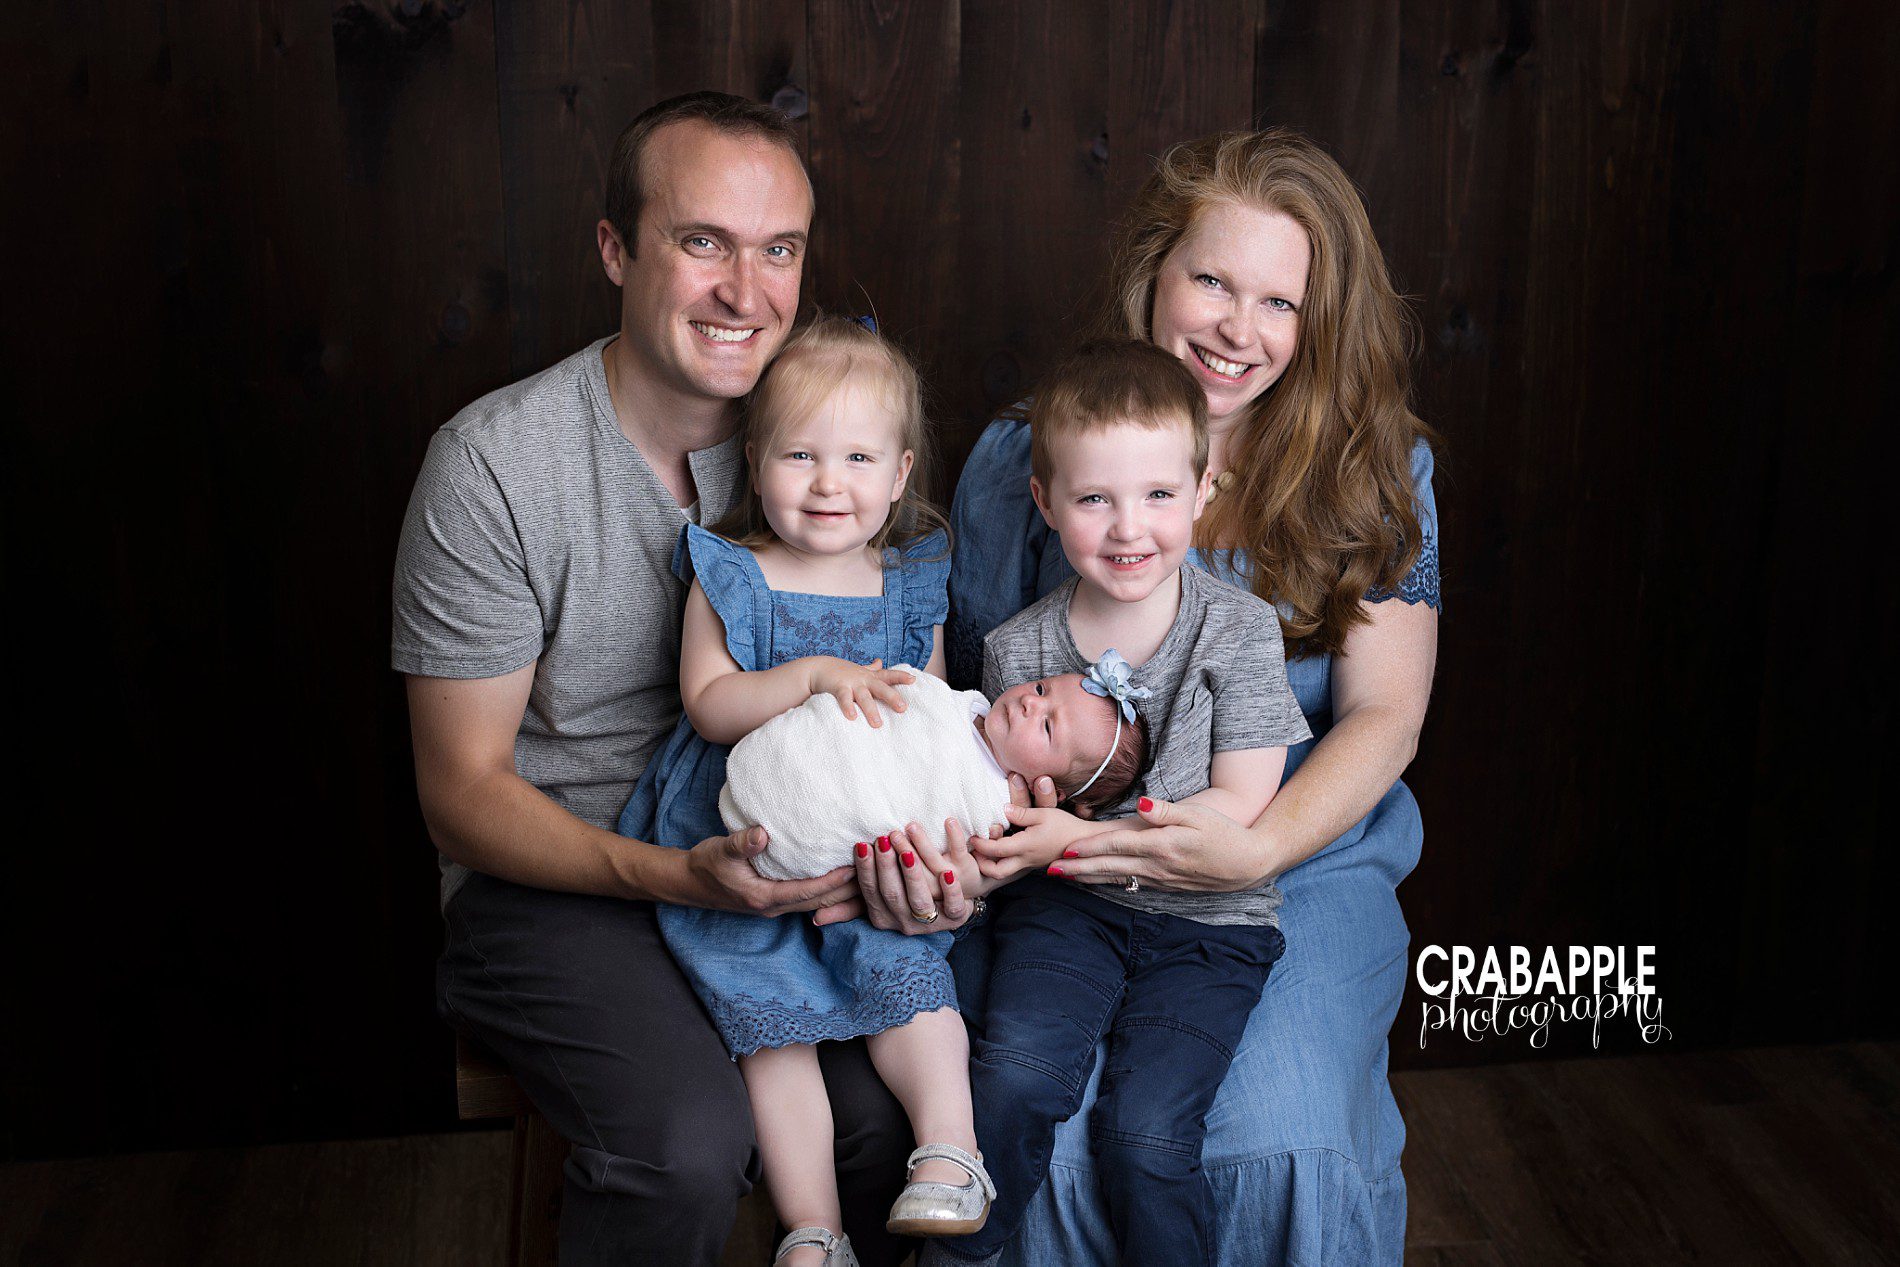 family portrait ideas with newborn baby and toddlers